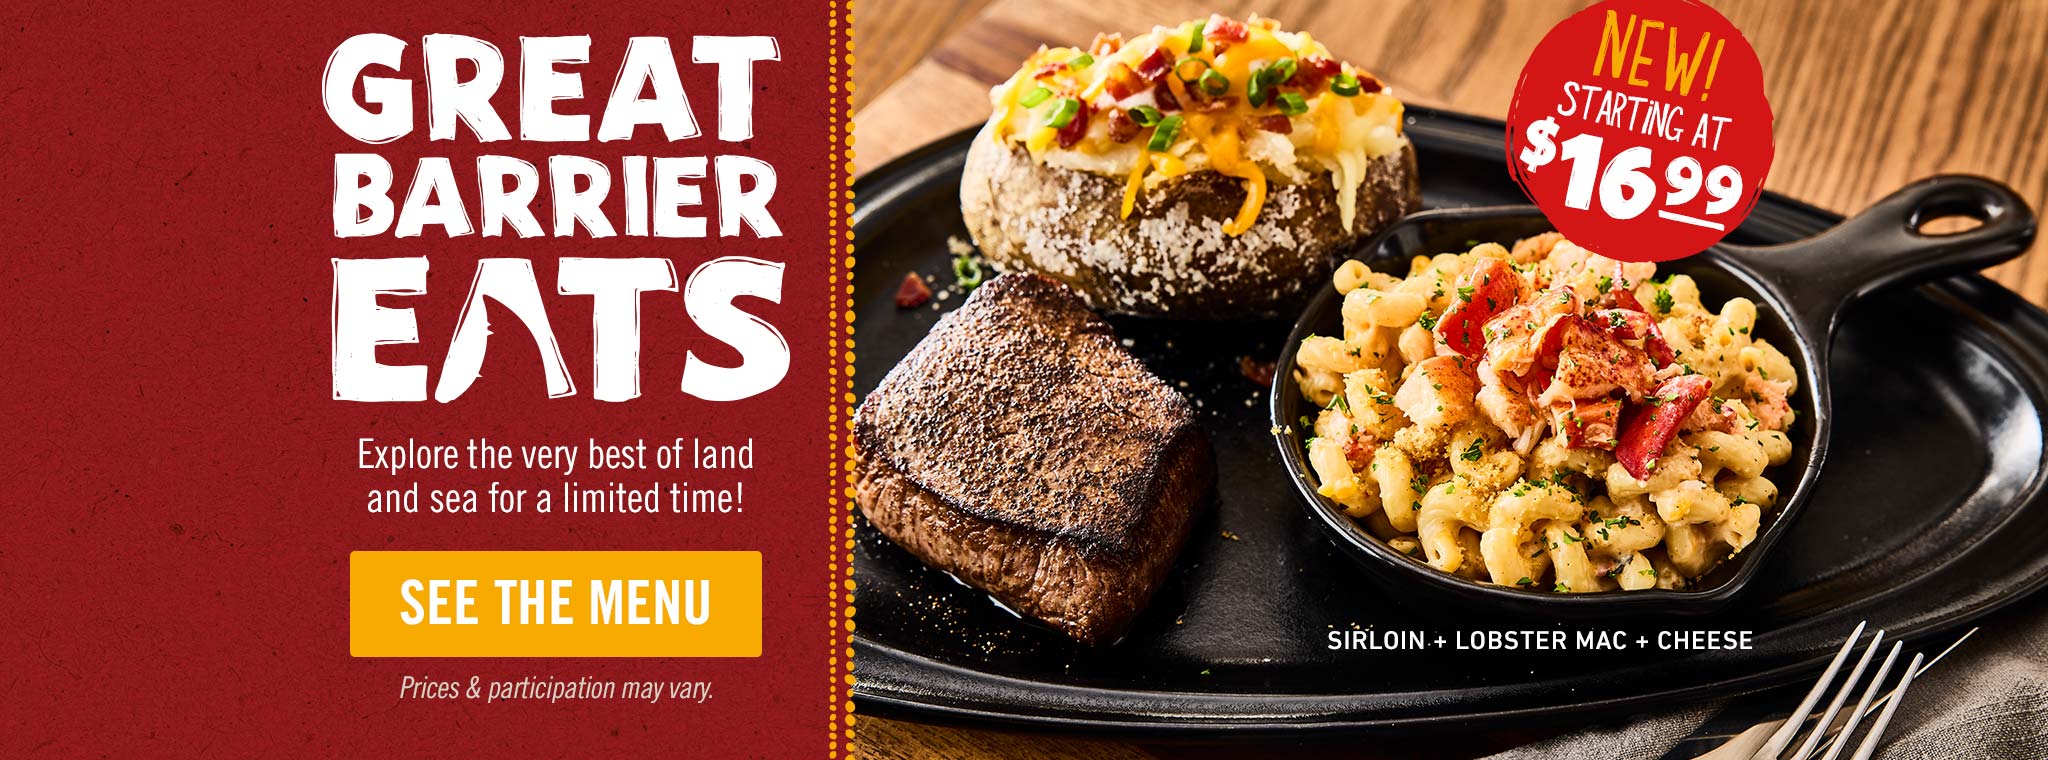 Great Barrier Eats for a limited time